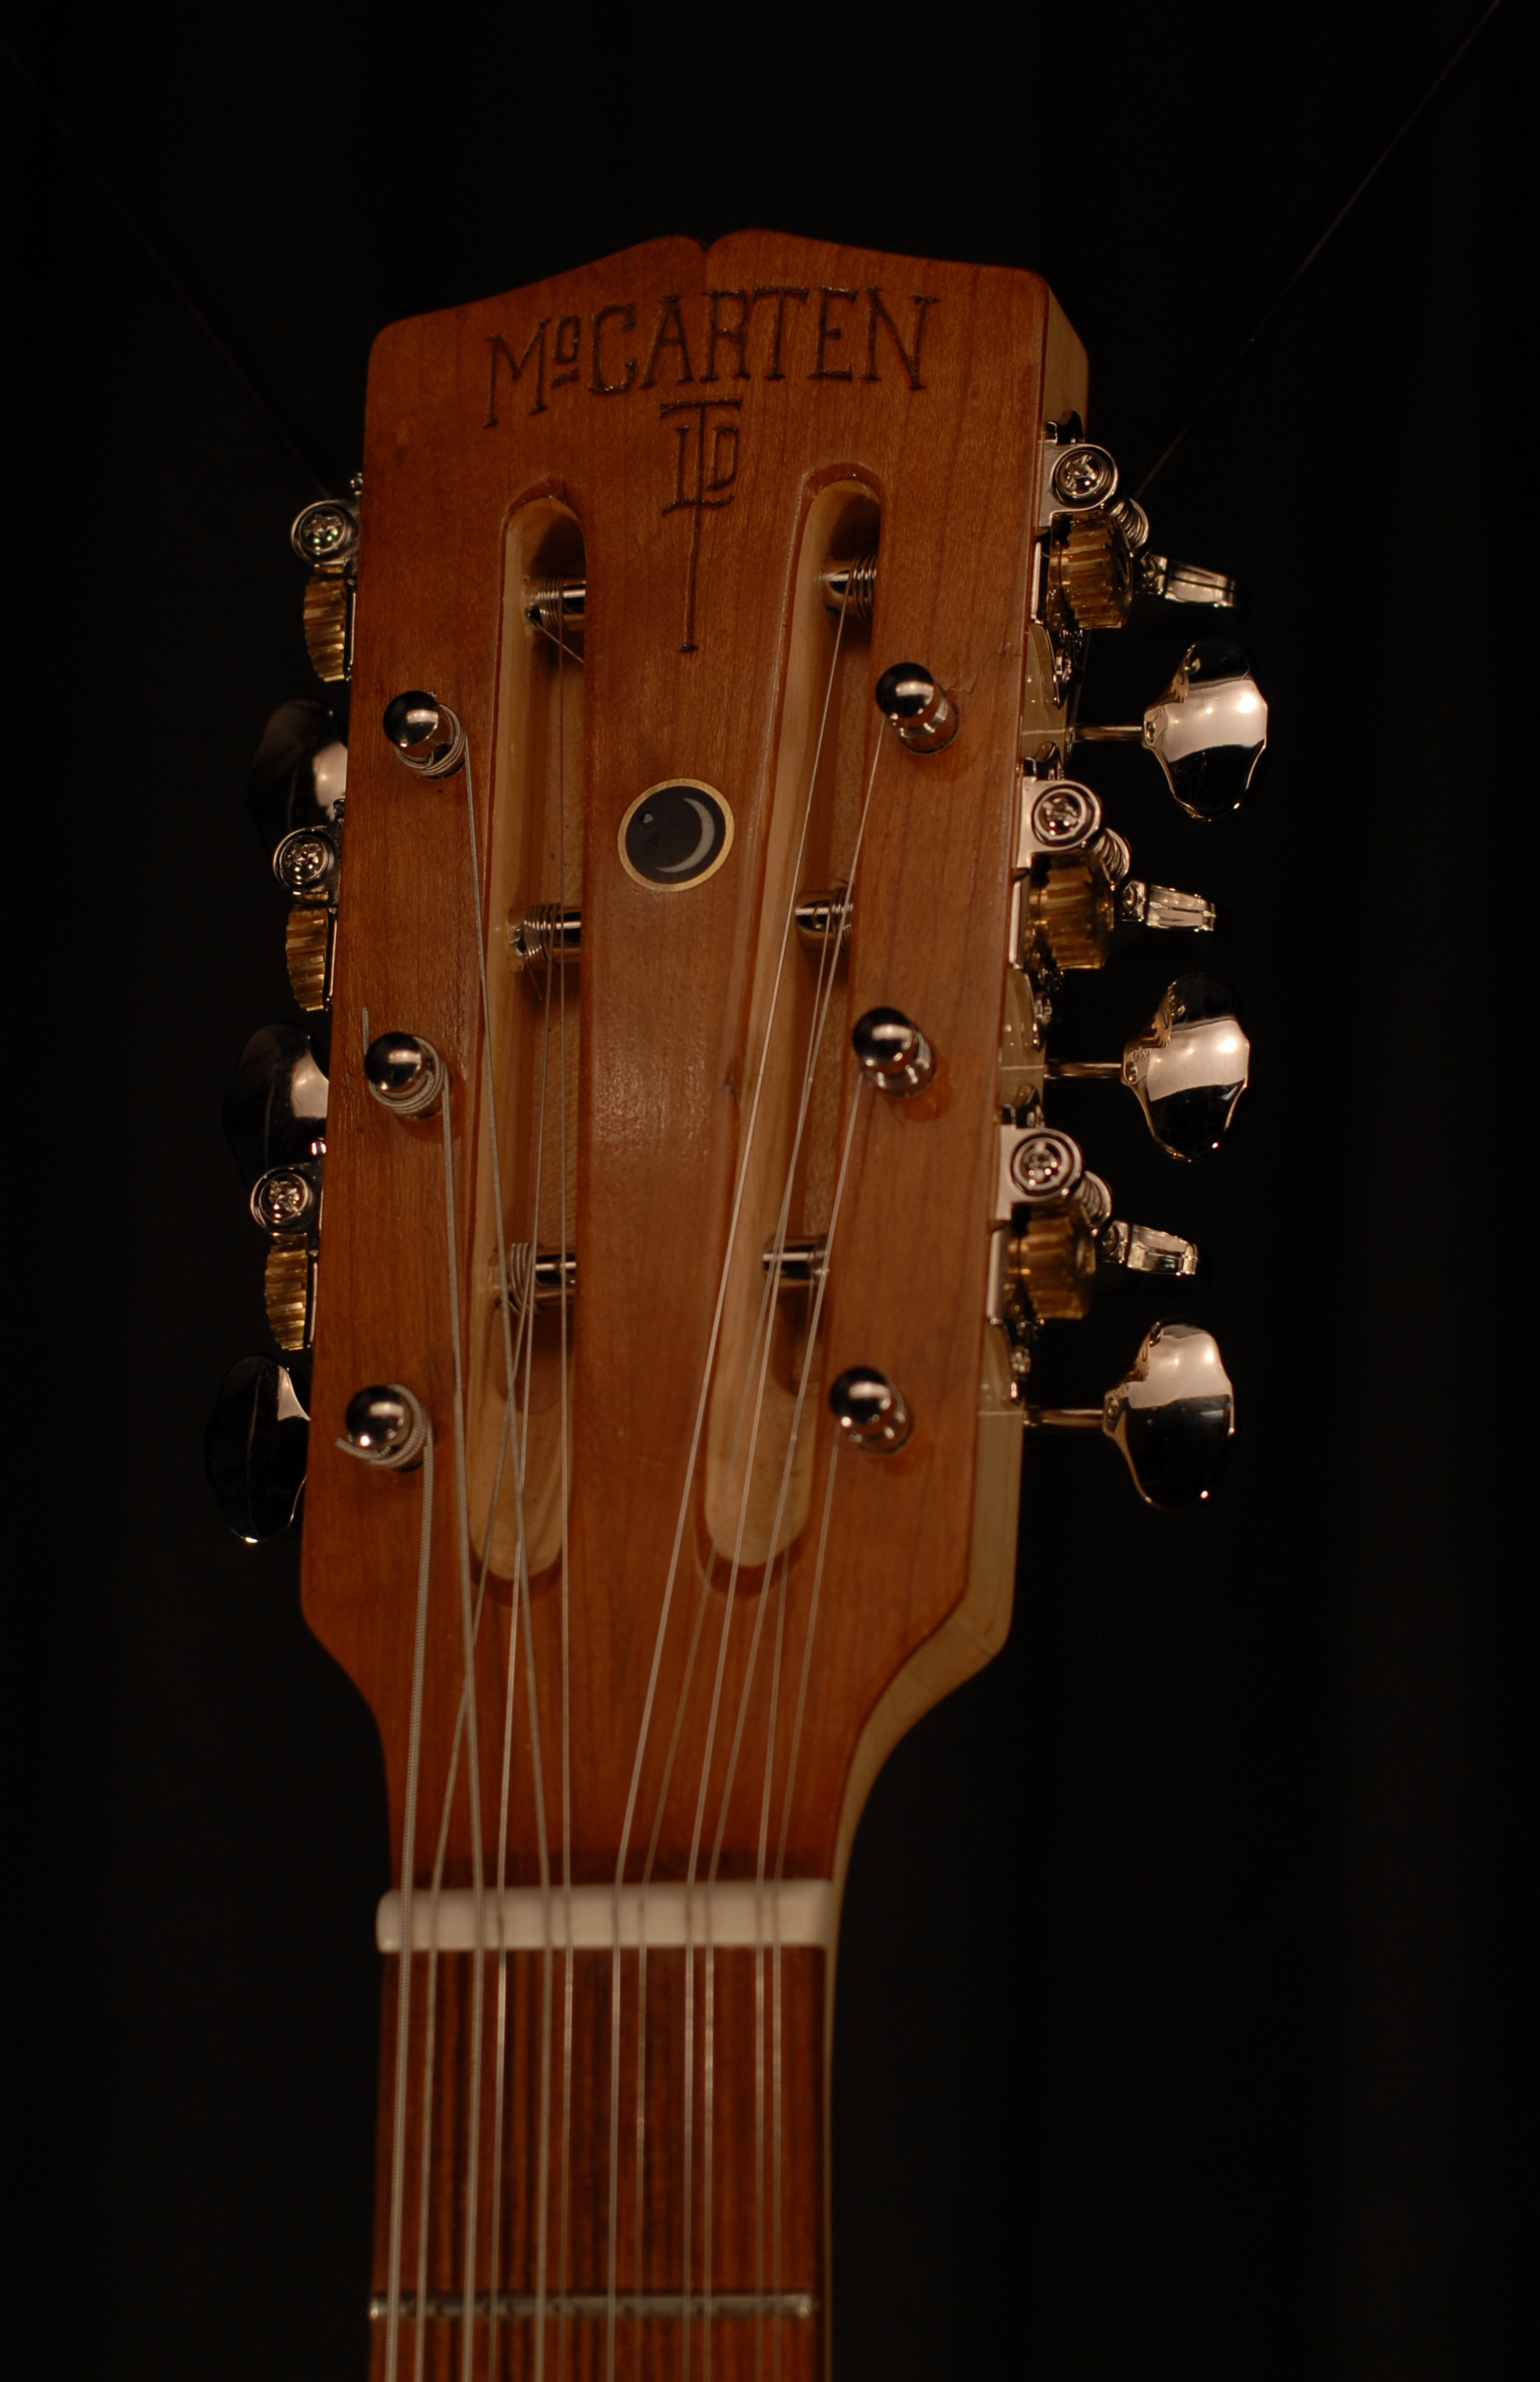 head front view of michael mccarten's double cutaway Electric 12 string guitar model